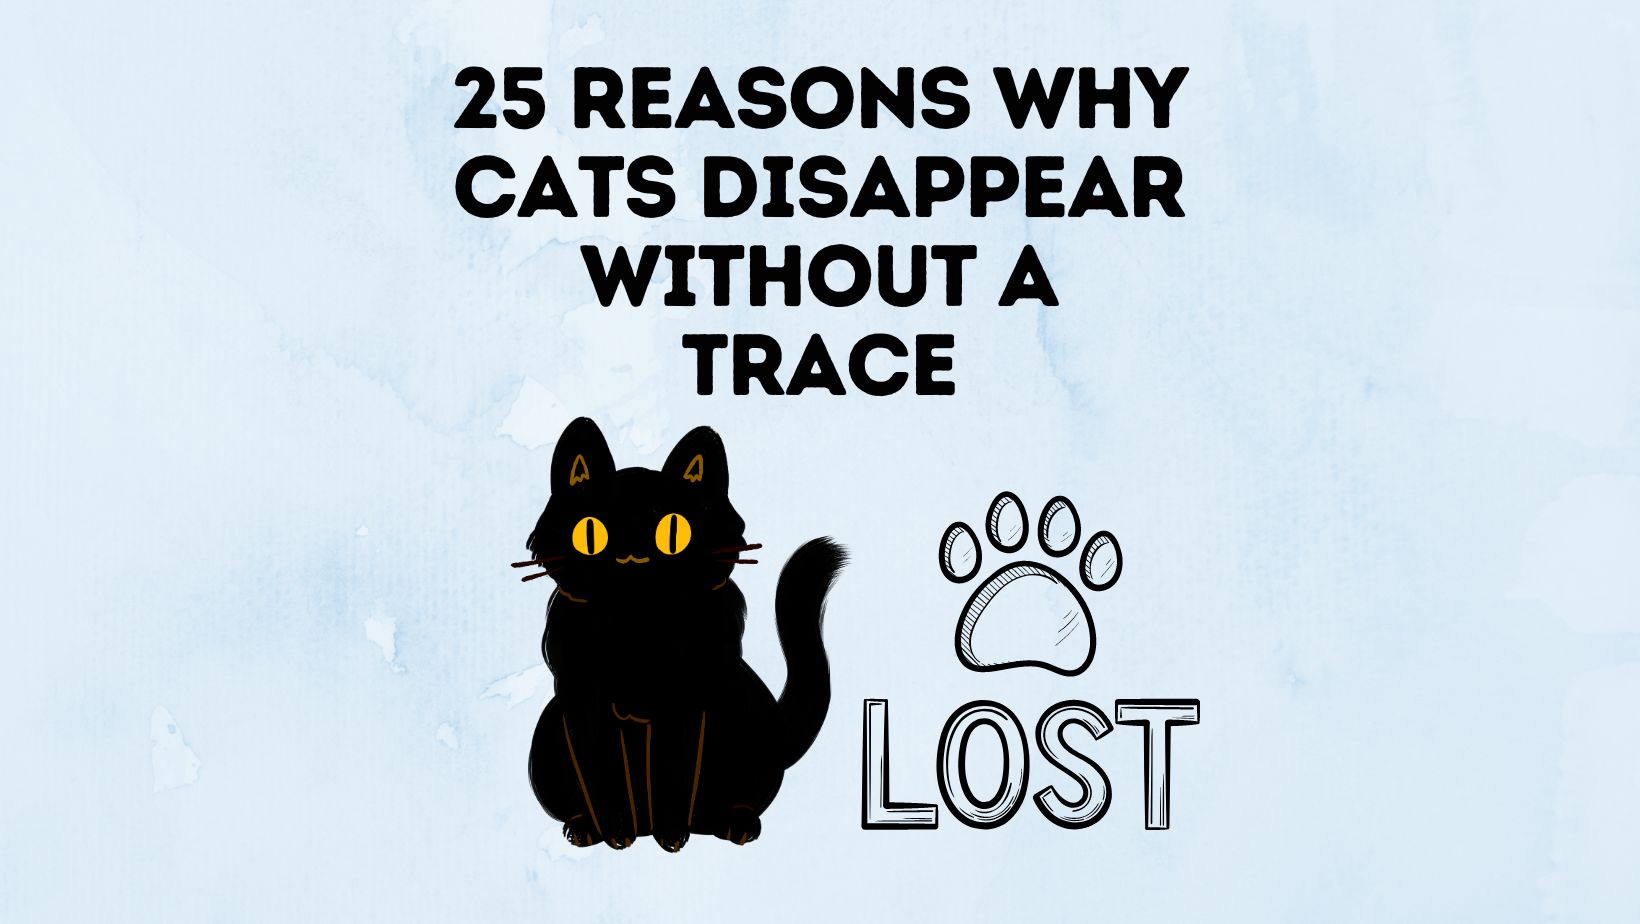 Why Cats Disappear Without A Trace